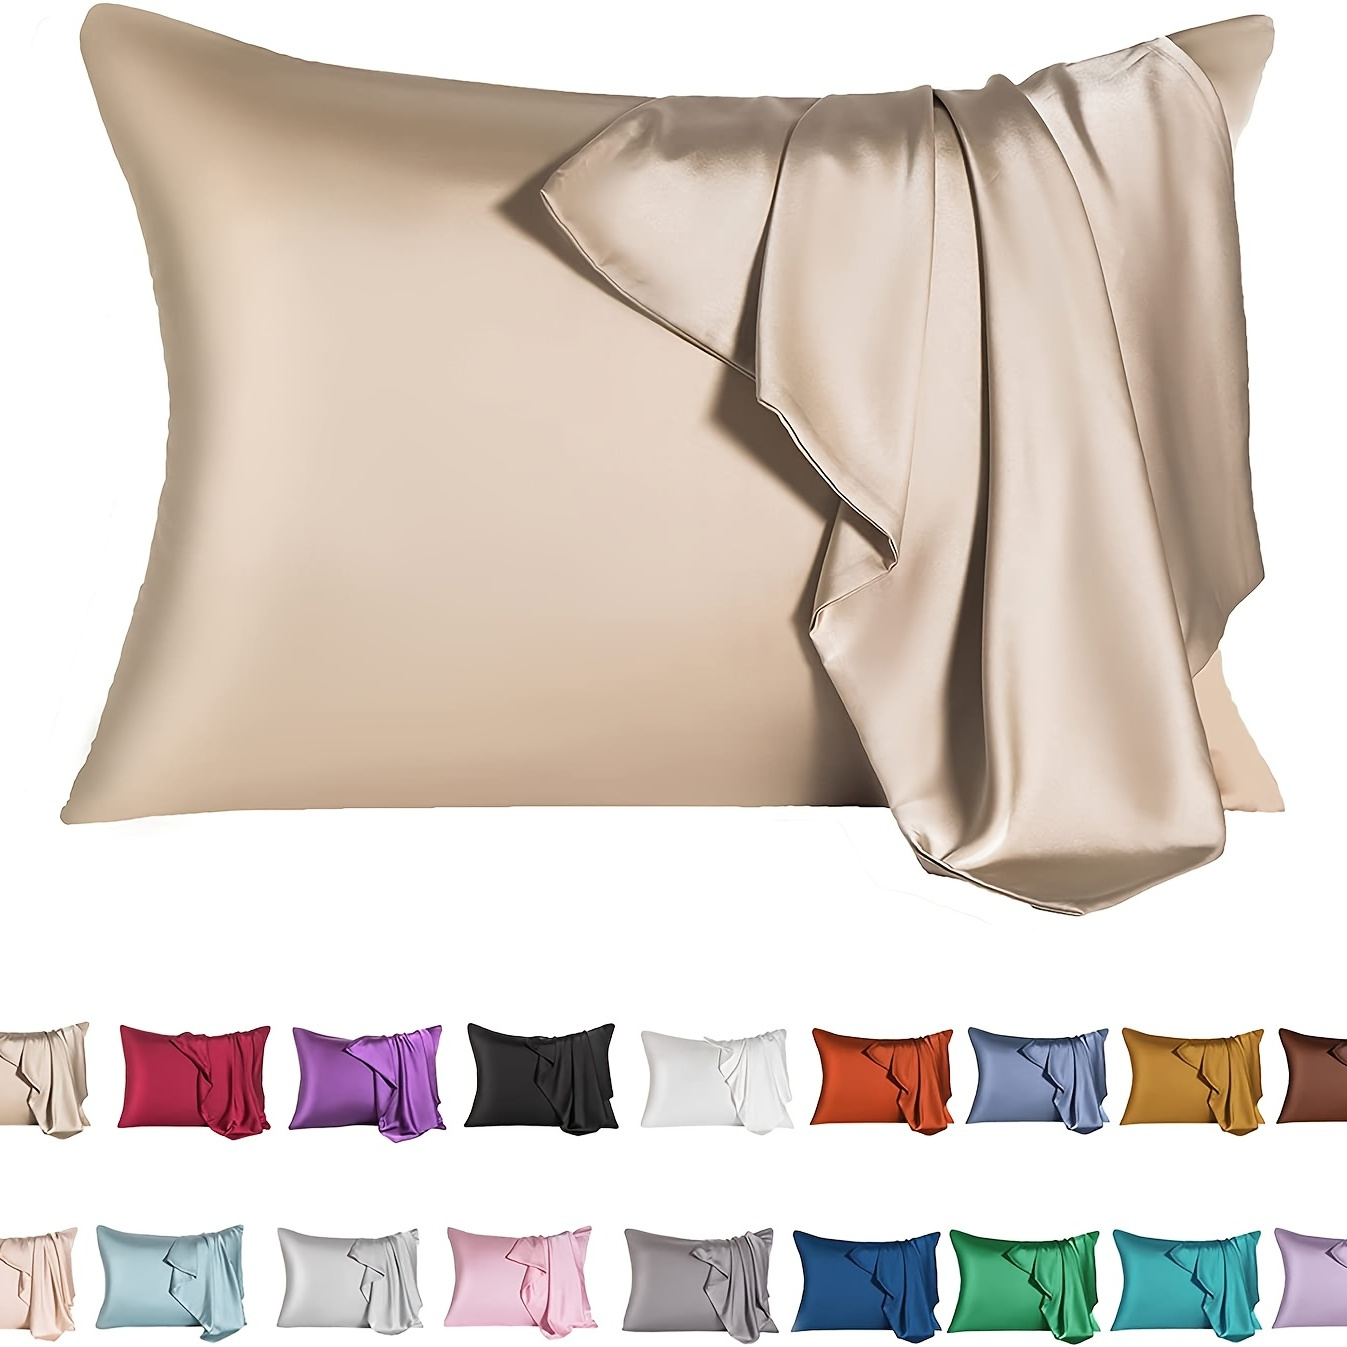 

2pcs Luxurious Satin Pillowcase For Bedroom And Living Room - Soft And Breathable, Perfect For Home Decor And Comfortable Sleep